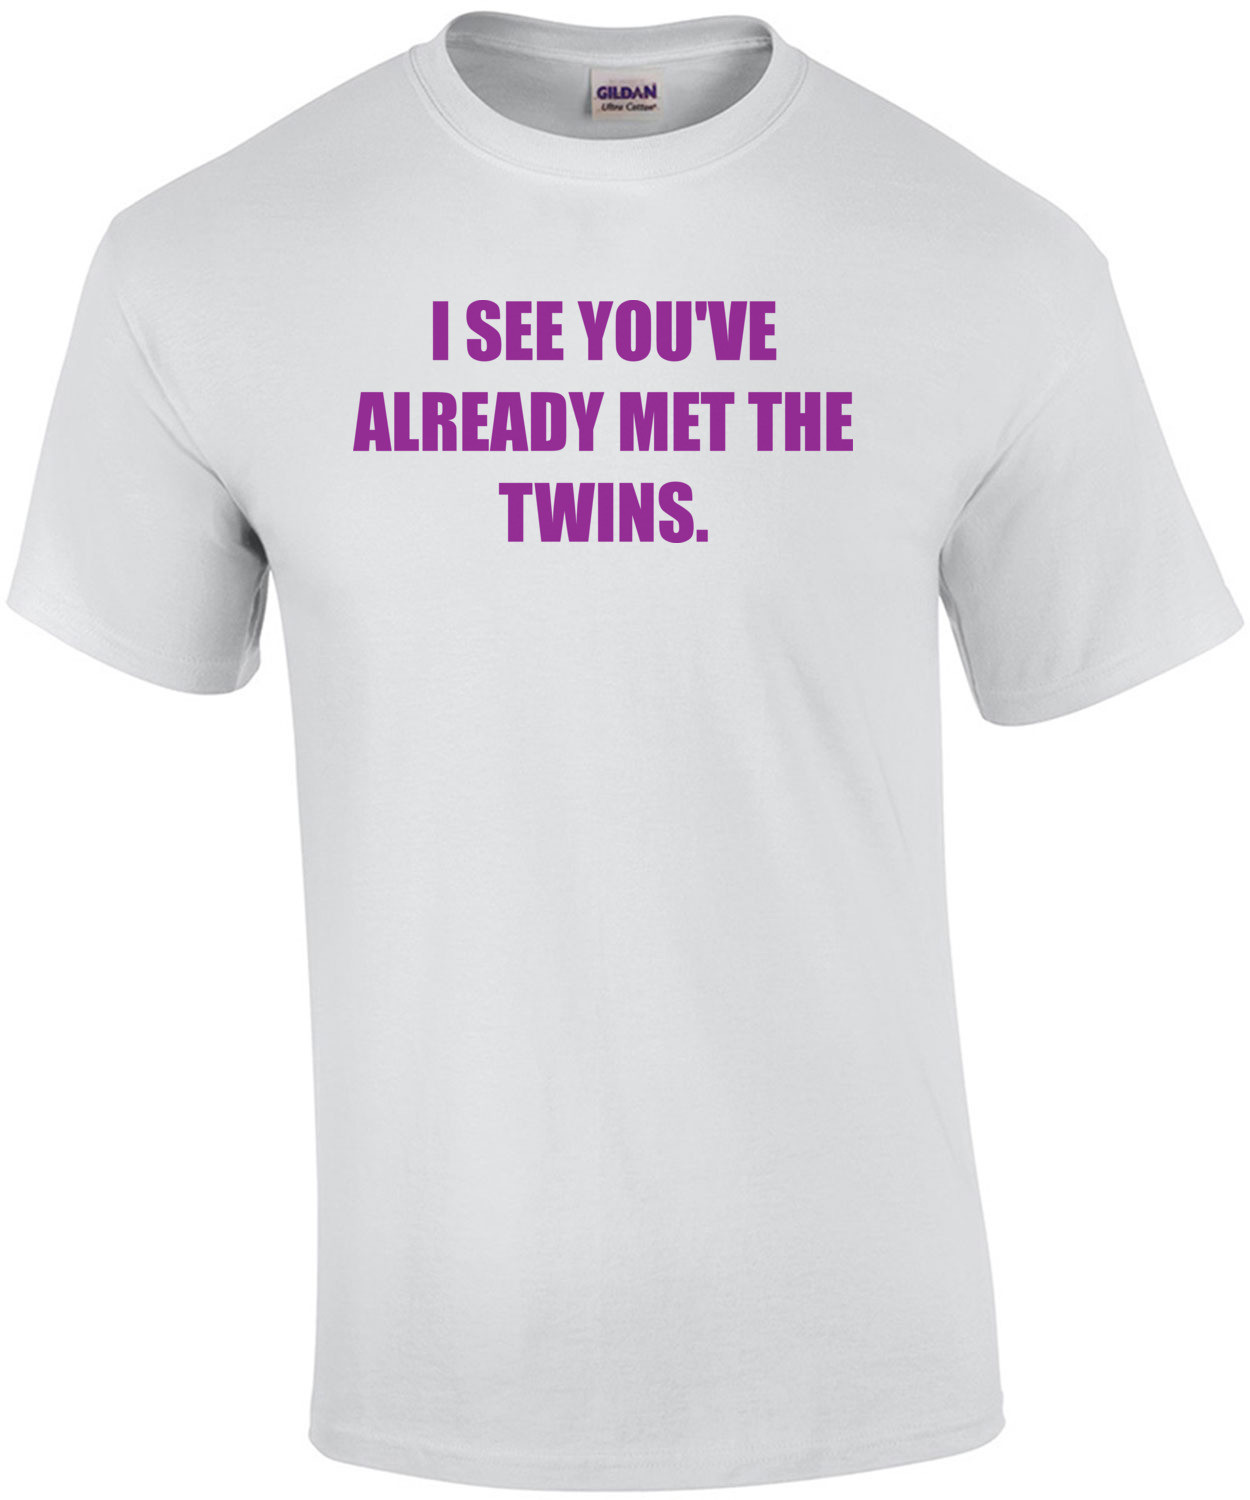 I SEE YOU'VE ALREADY MET THE TWINS. Shirt